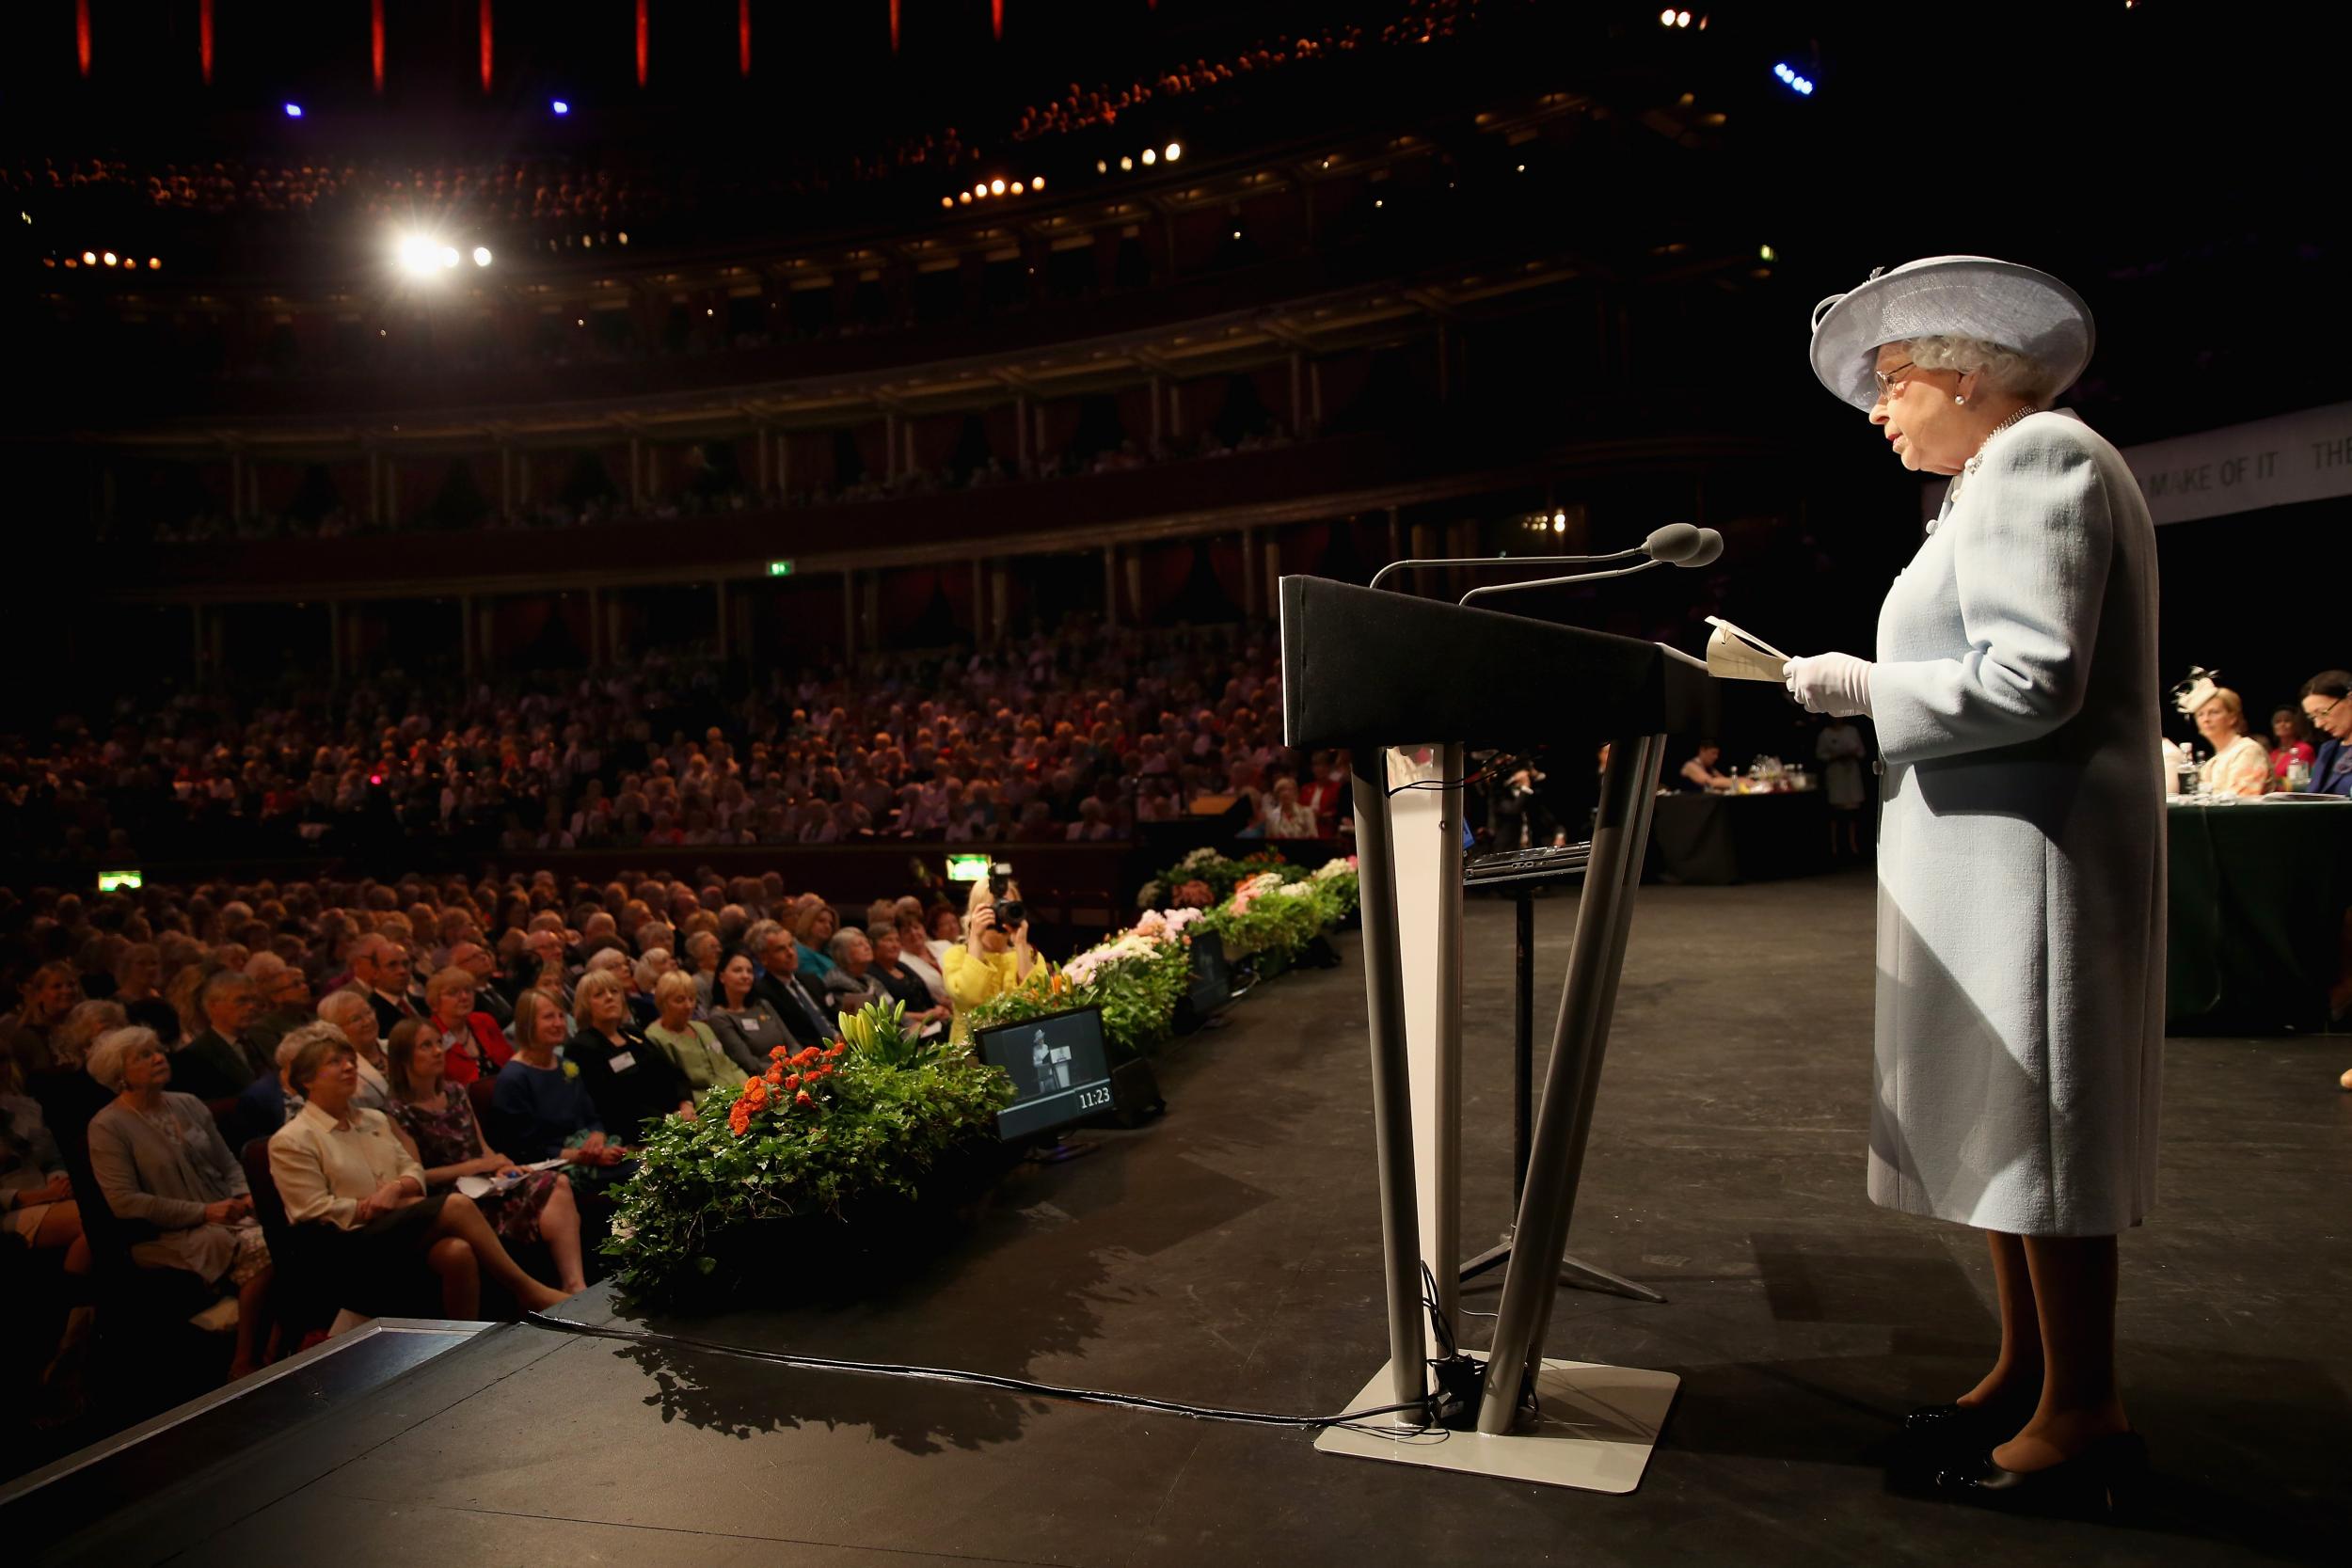 The Queen delivered a speech at the Royal Albert Hall on 4 June 2015 to mark 100 years of the Women's Institute